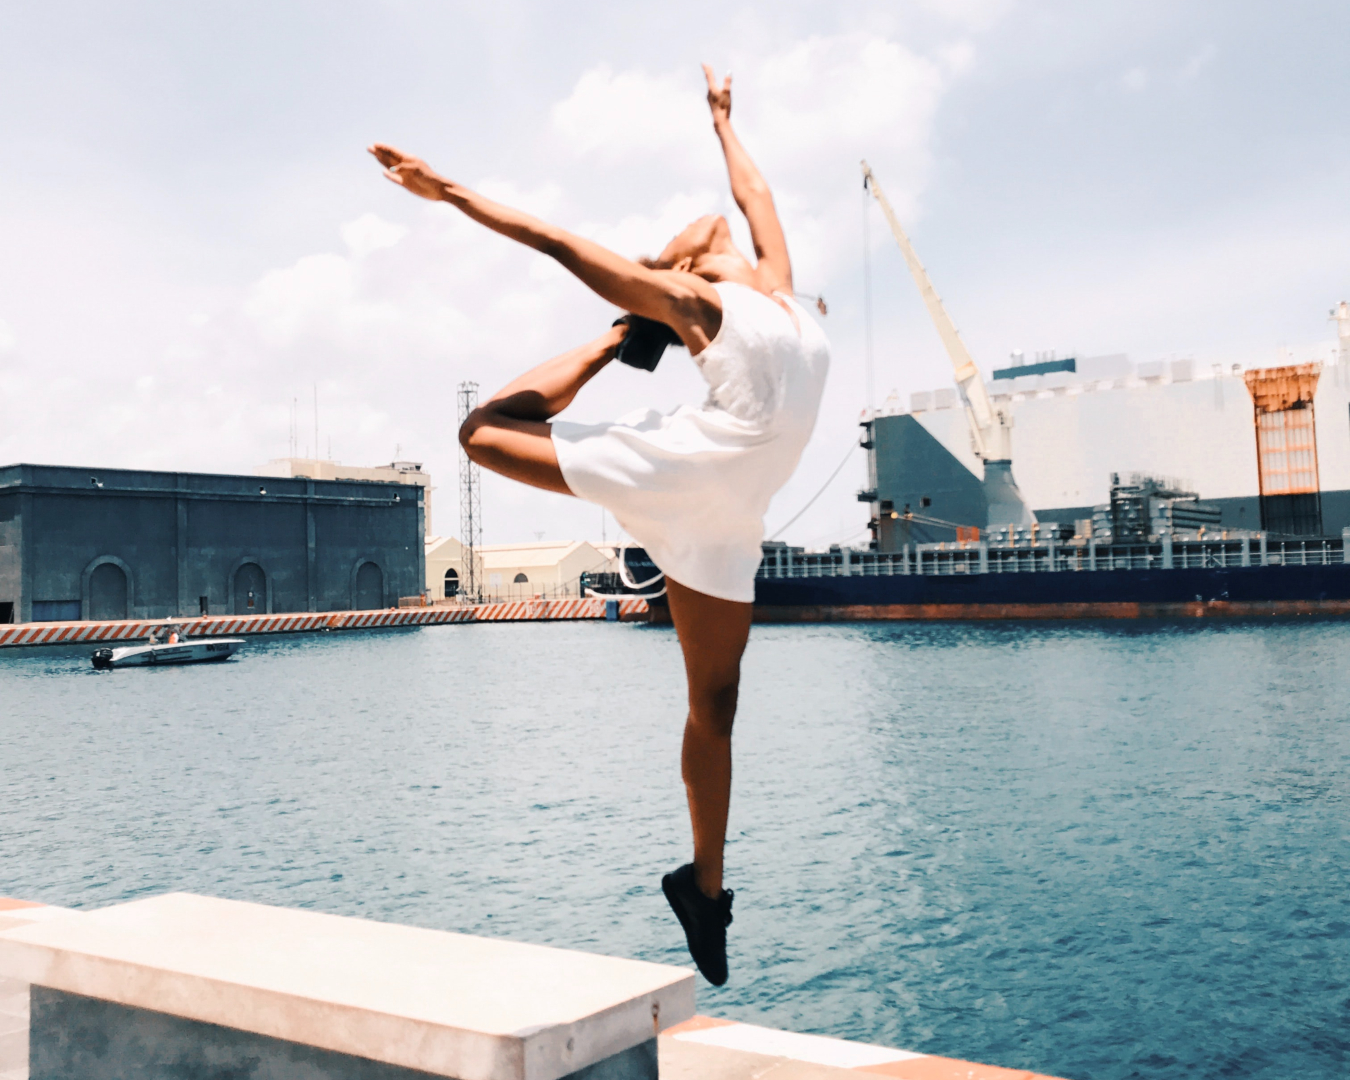 Woman jumping in mid-air with arms high, next to a city port